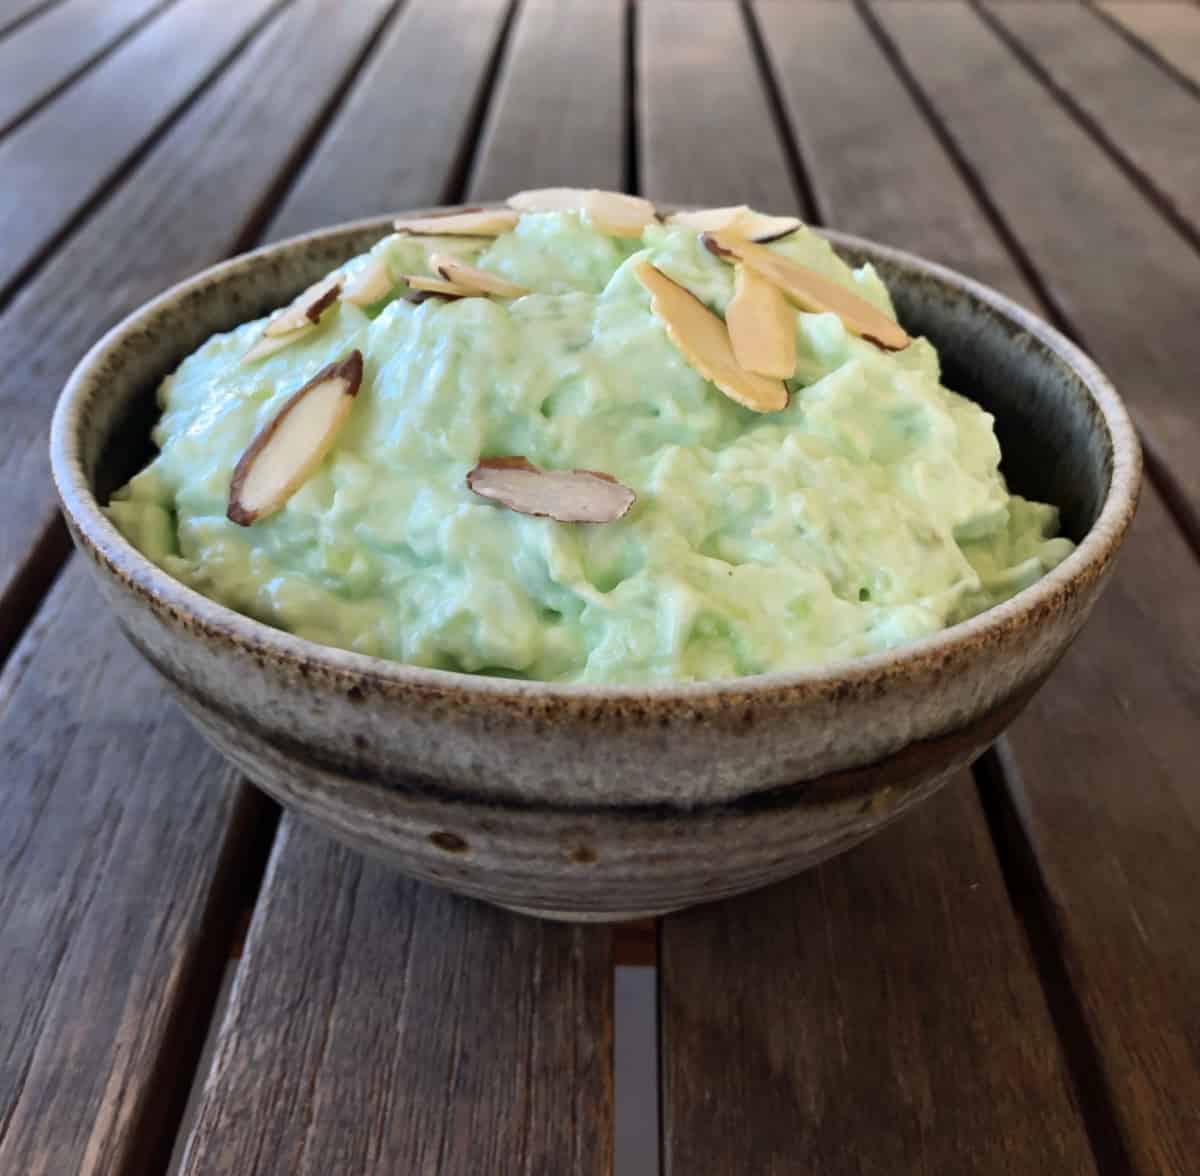 Watergate pistachio jello salad topped with sliced almonds in ceramic bowl.